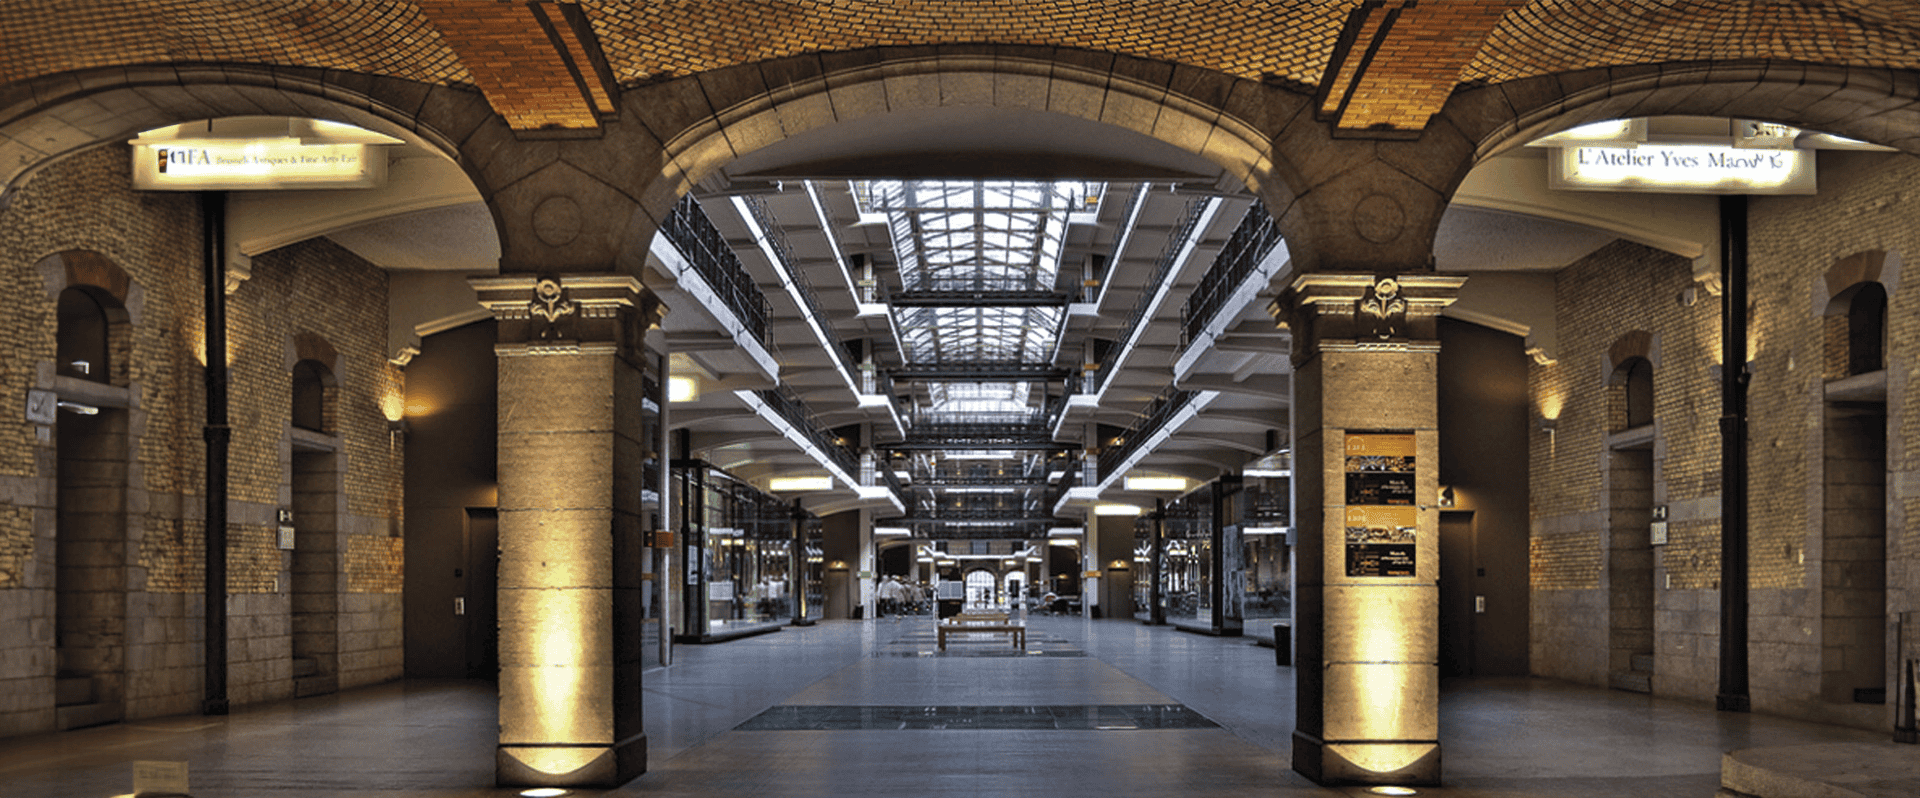 EAA – EMRE AROLAT ARCHITECTURE | TOUR AND TAXIS RENOVATION OF ANTREPOT ROYAL